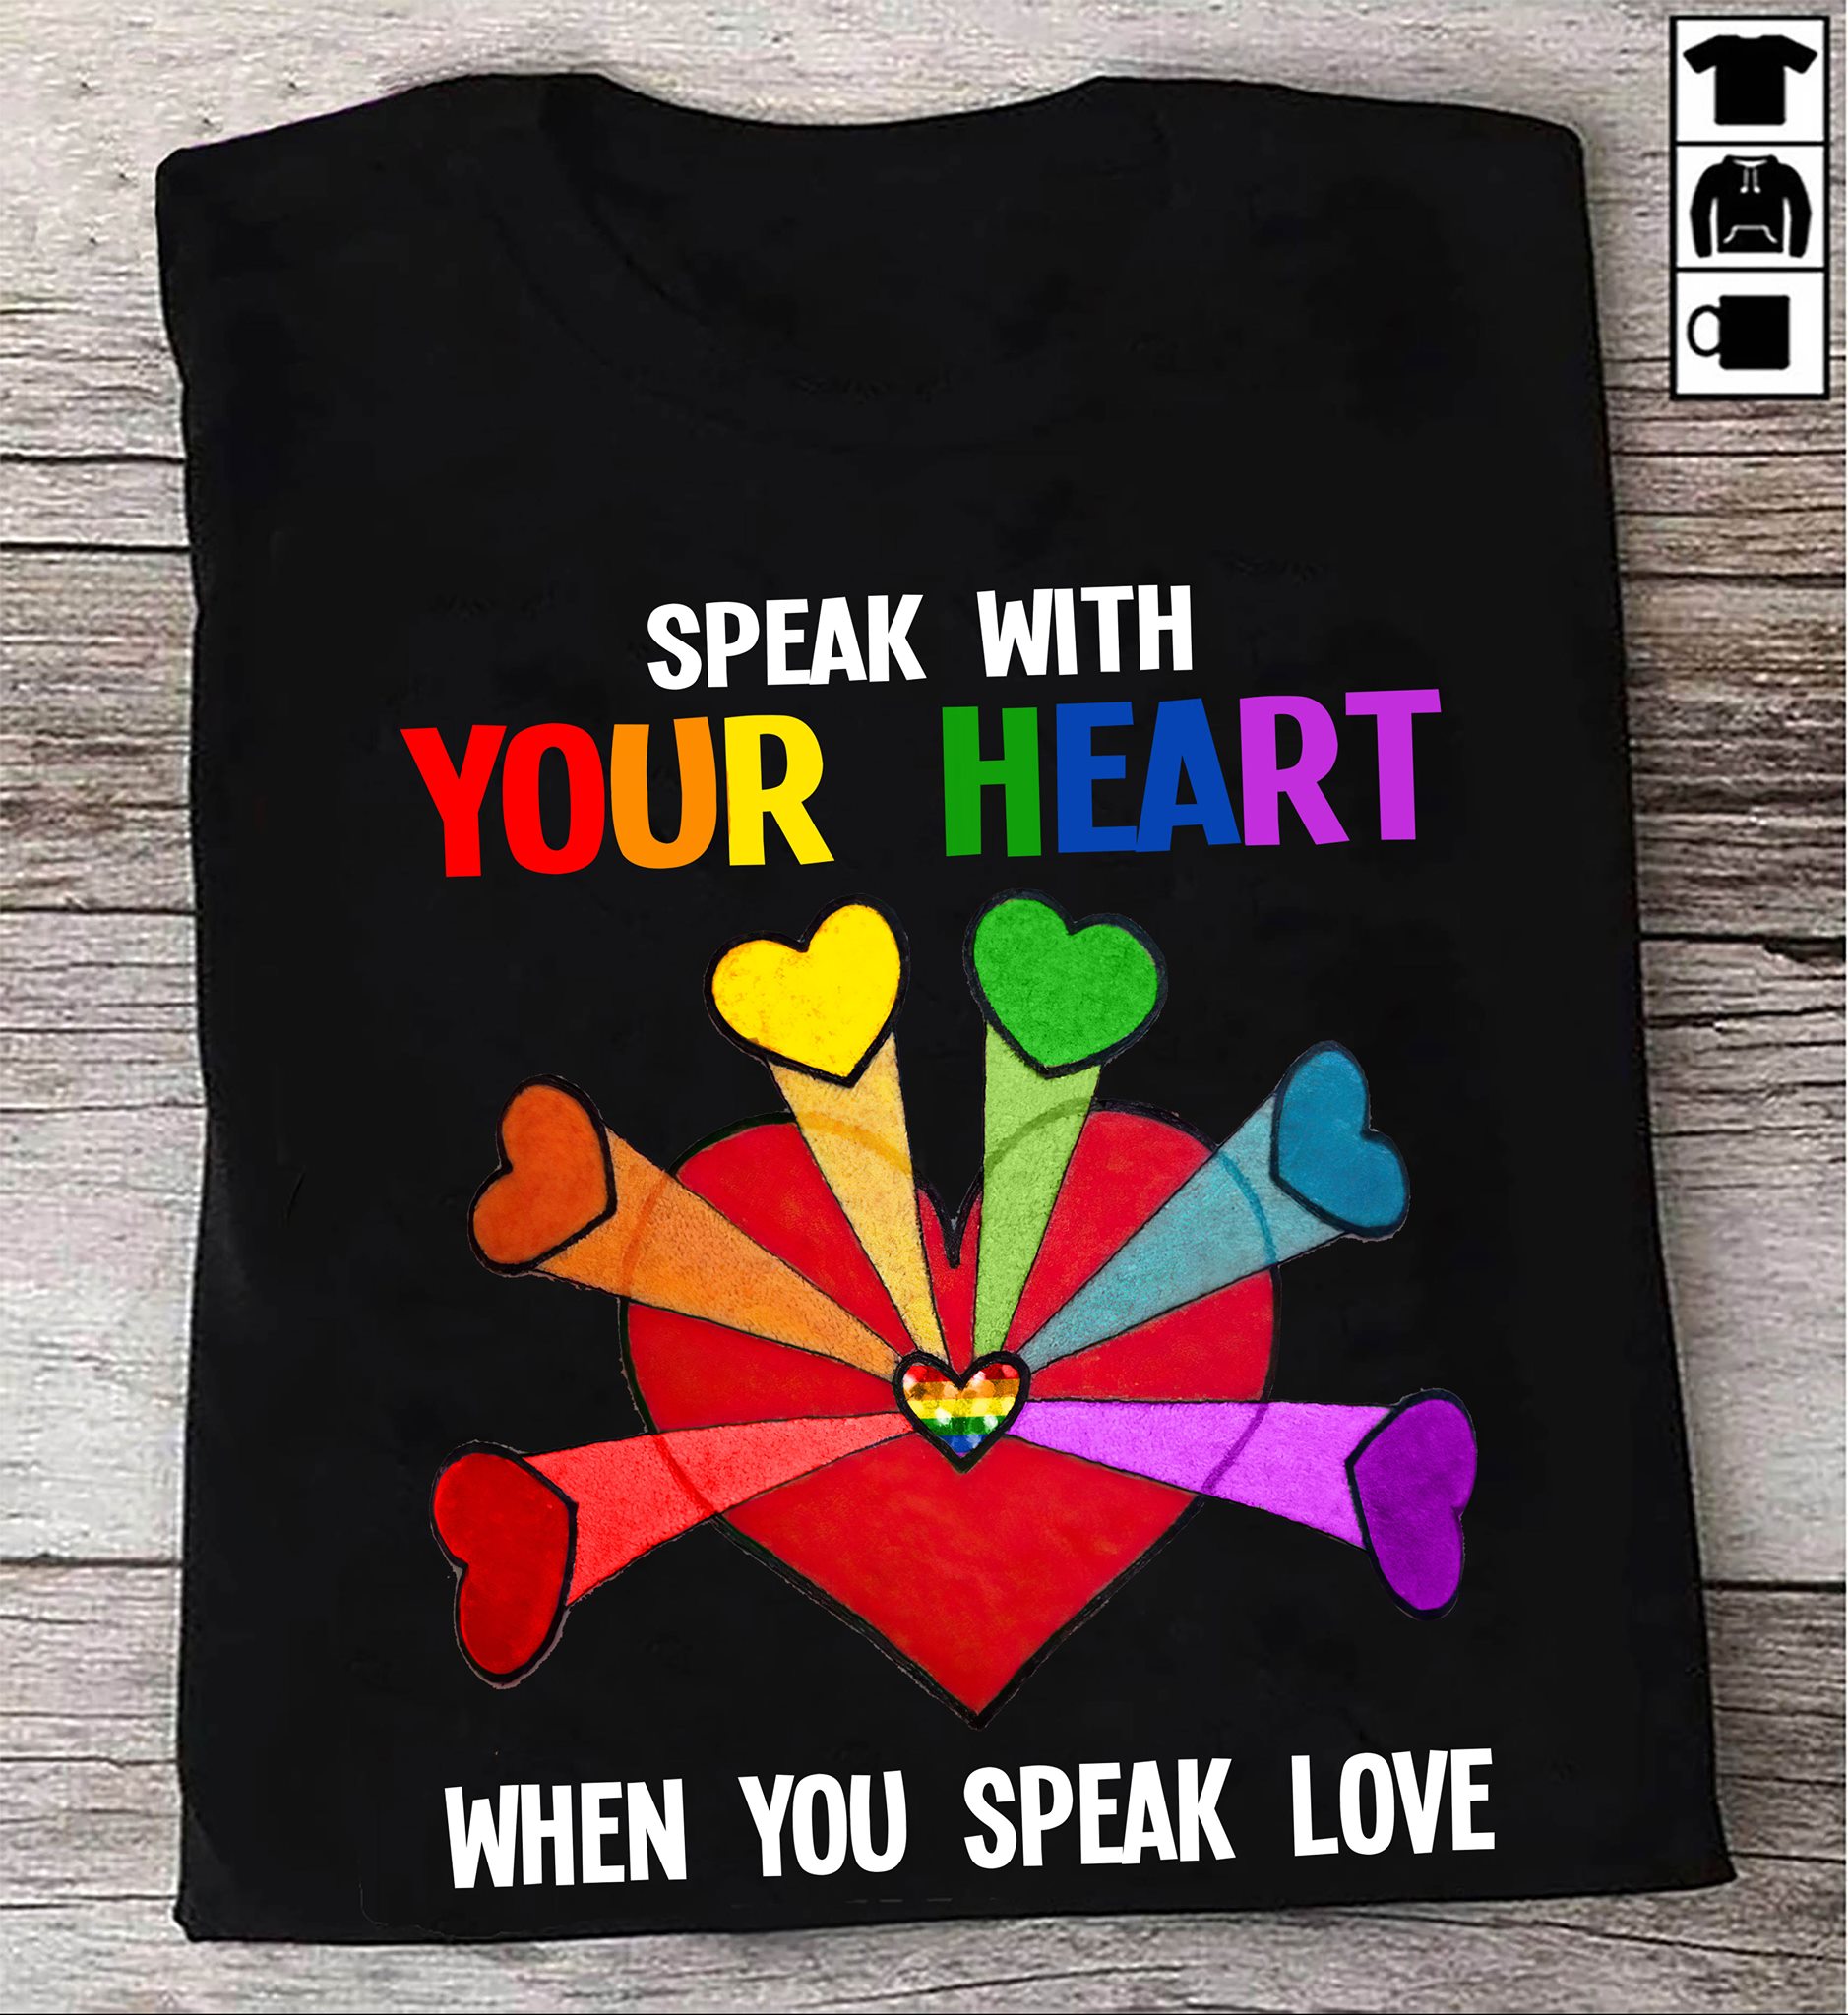 The Heart Of The LGBT Community - Speak With Your Heart When You Speak Love